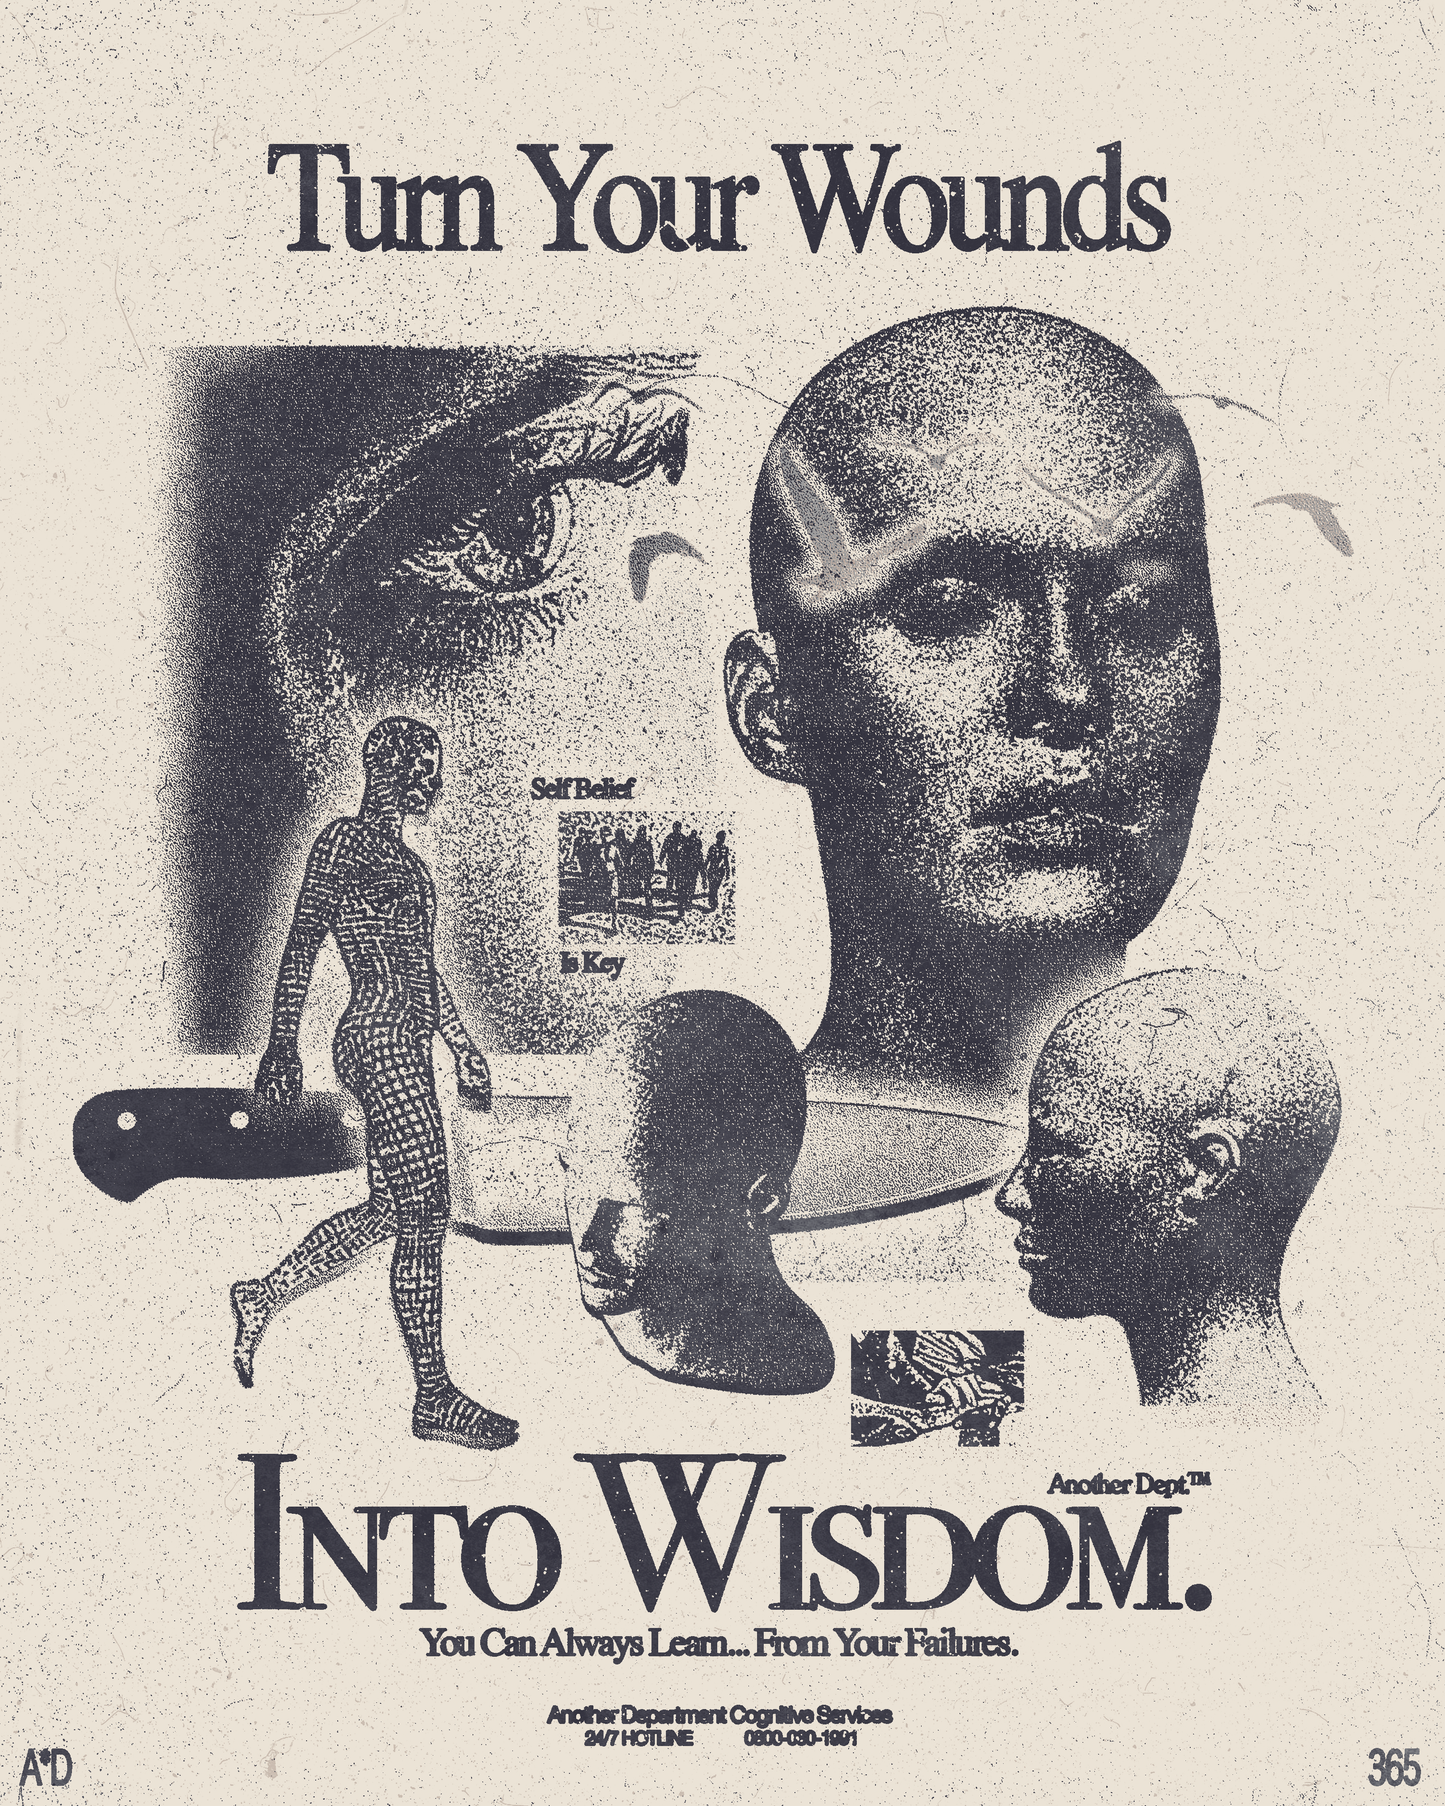 192 - Turn Your Wounds into Wisdom